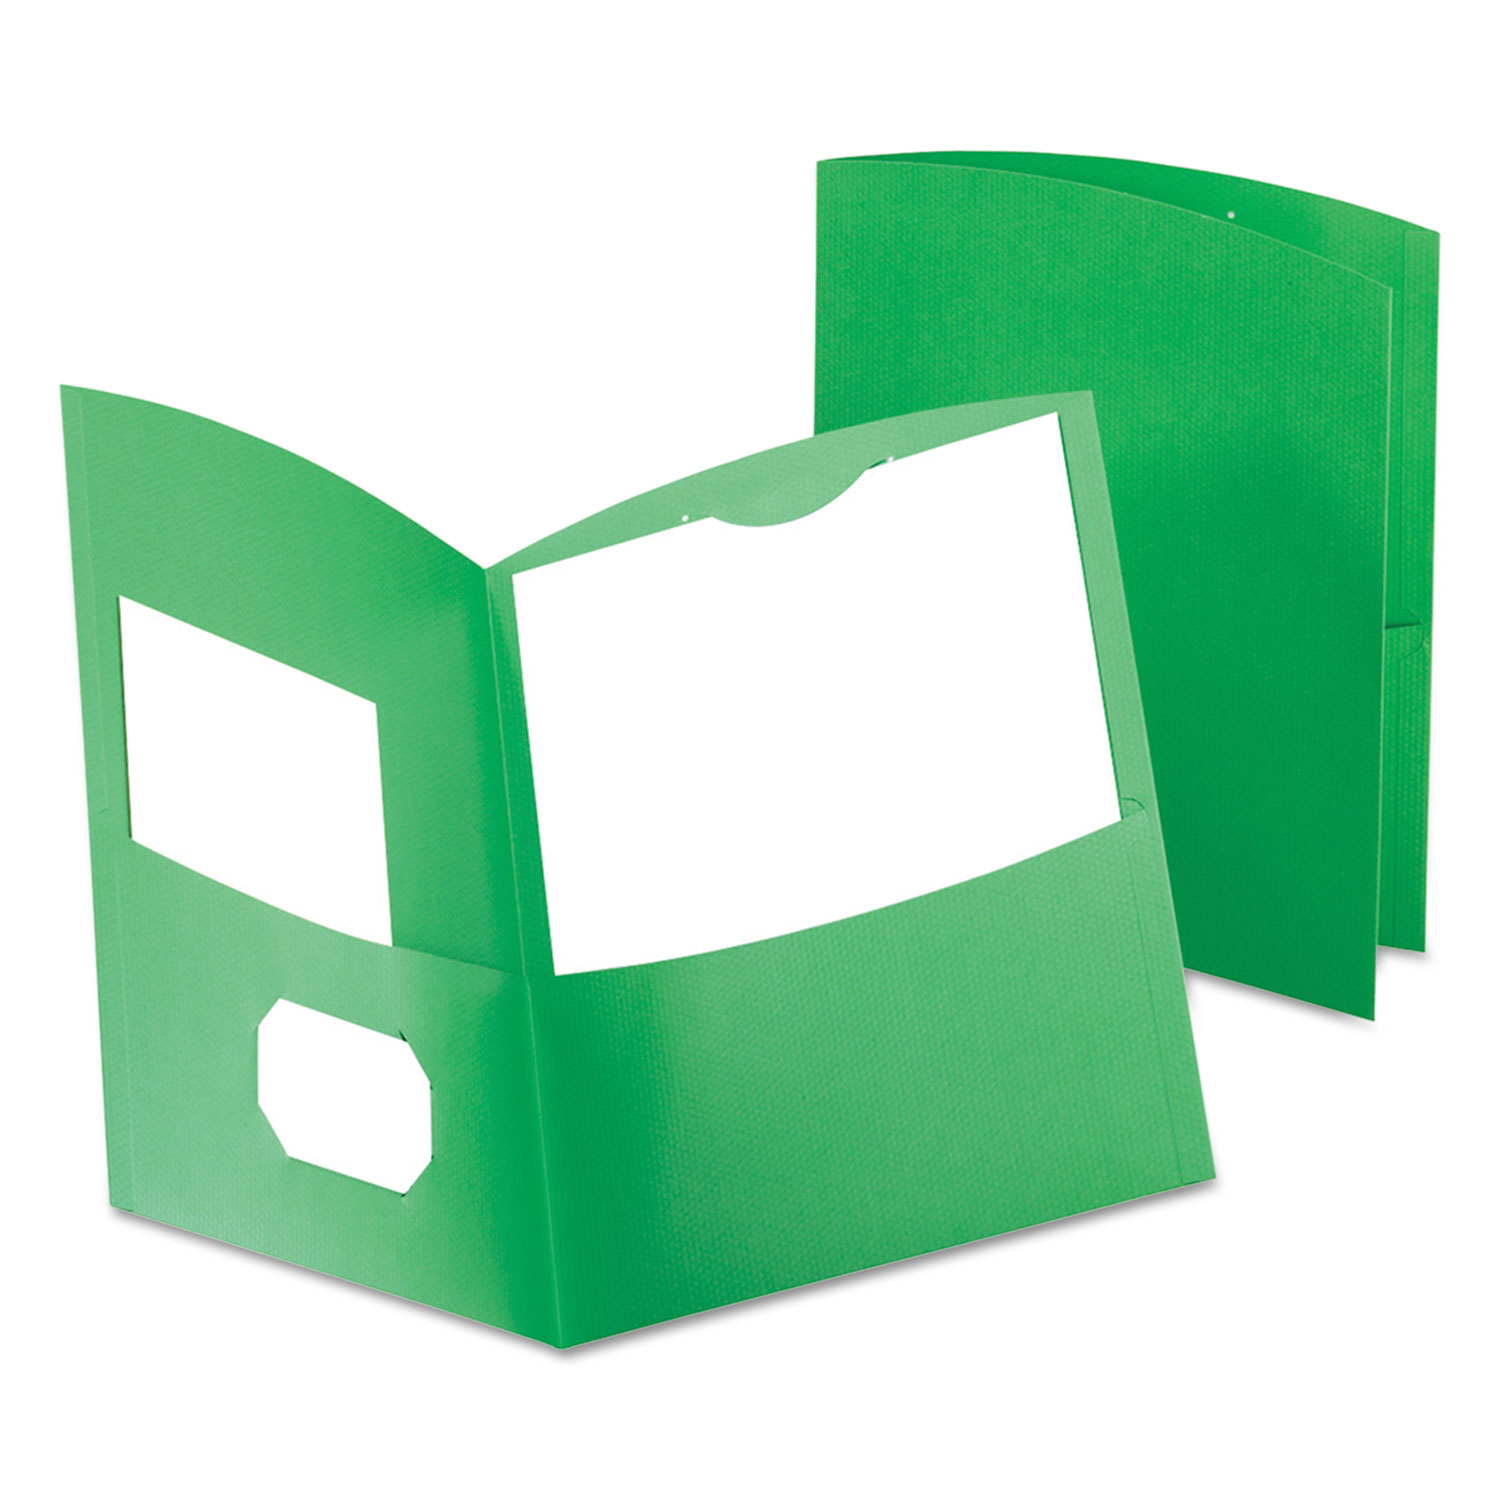 Contour Two-Pocket Recycled Paper Folder, 100-Sheet Capacity, Green